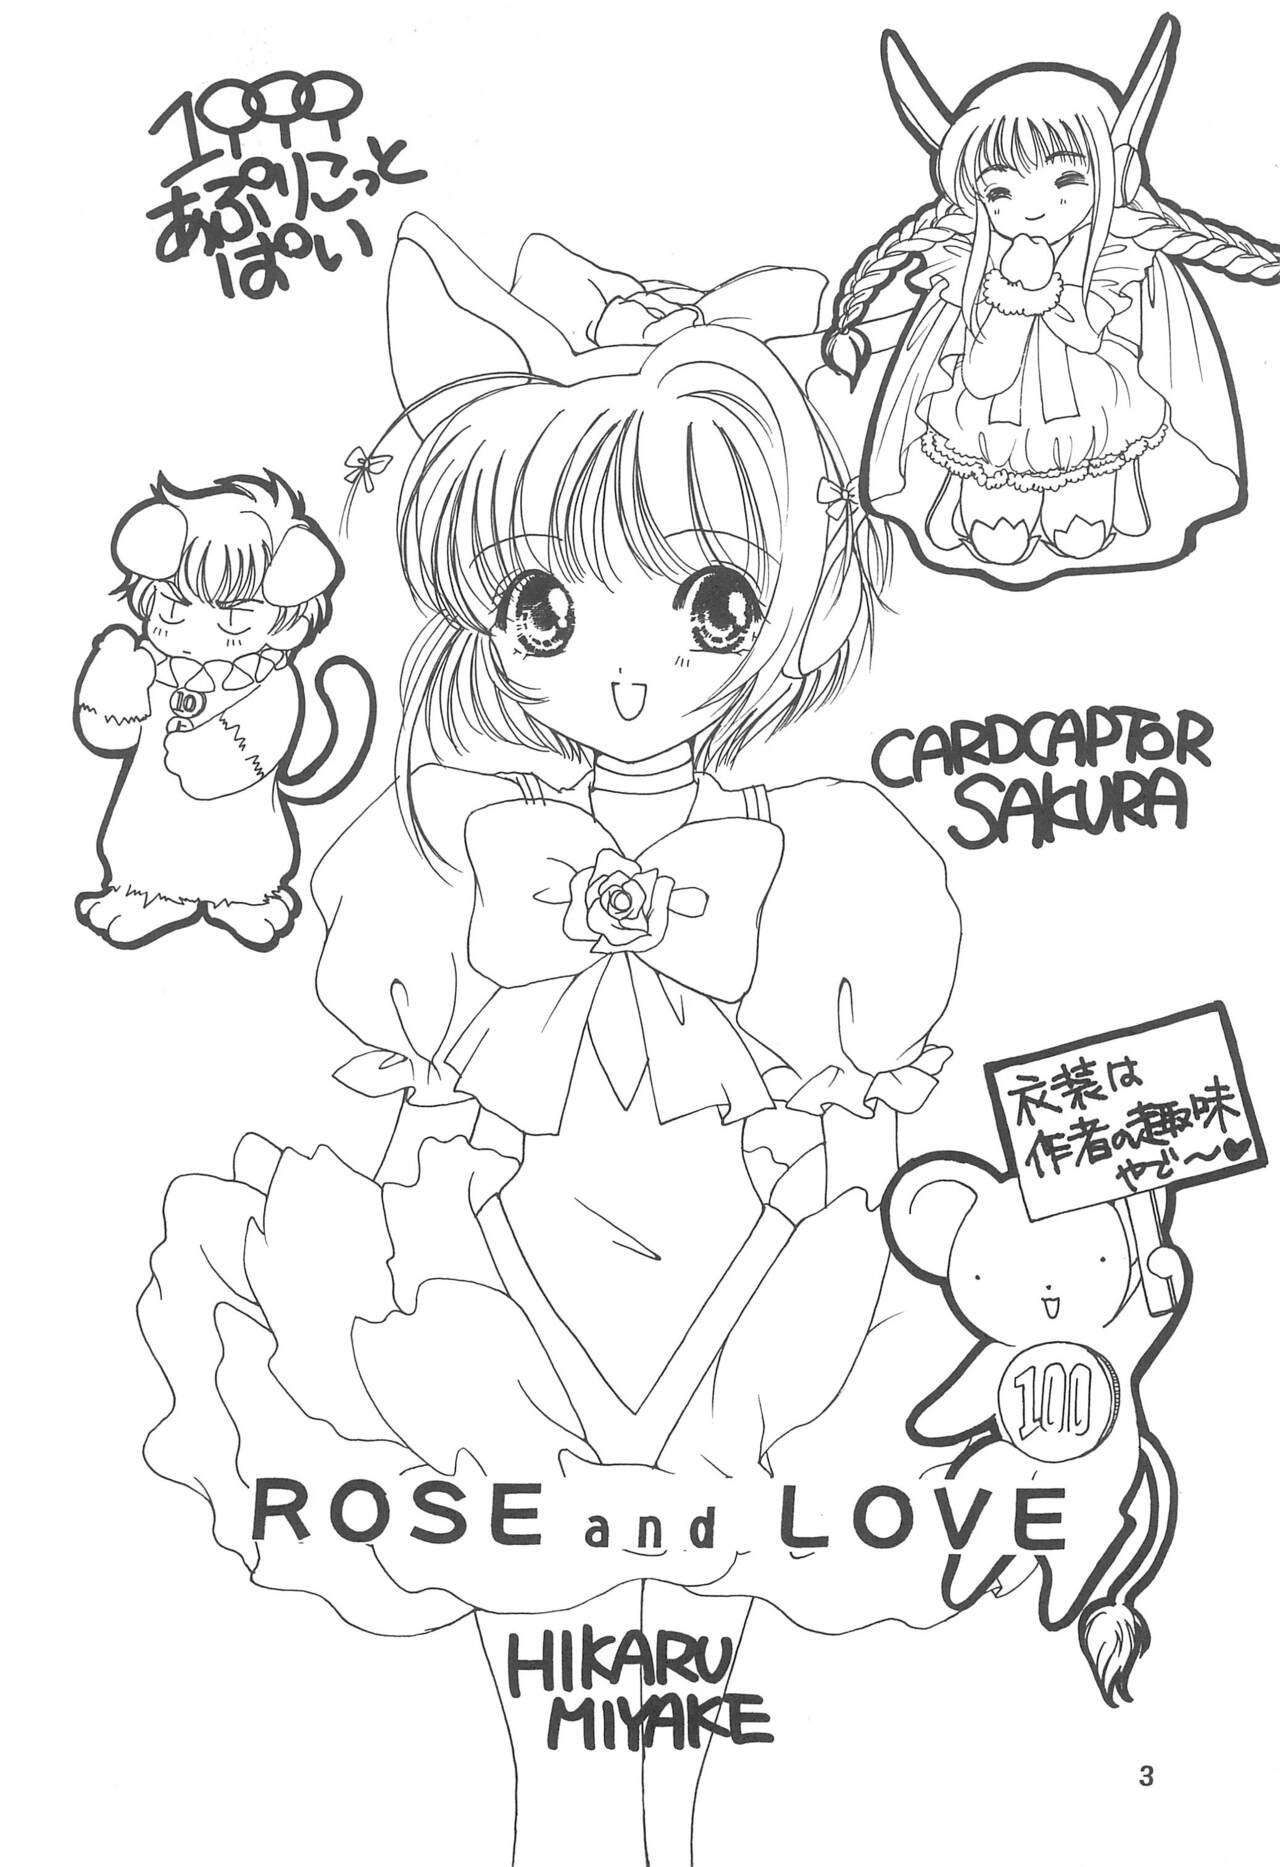 ROSE and LOVE 4